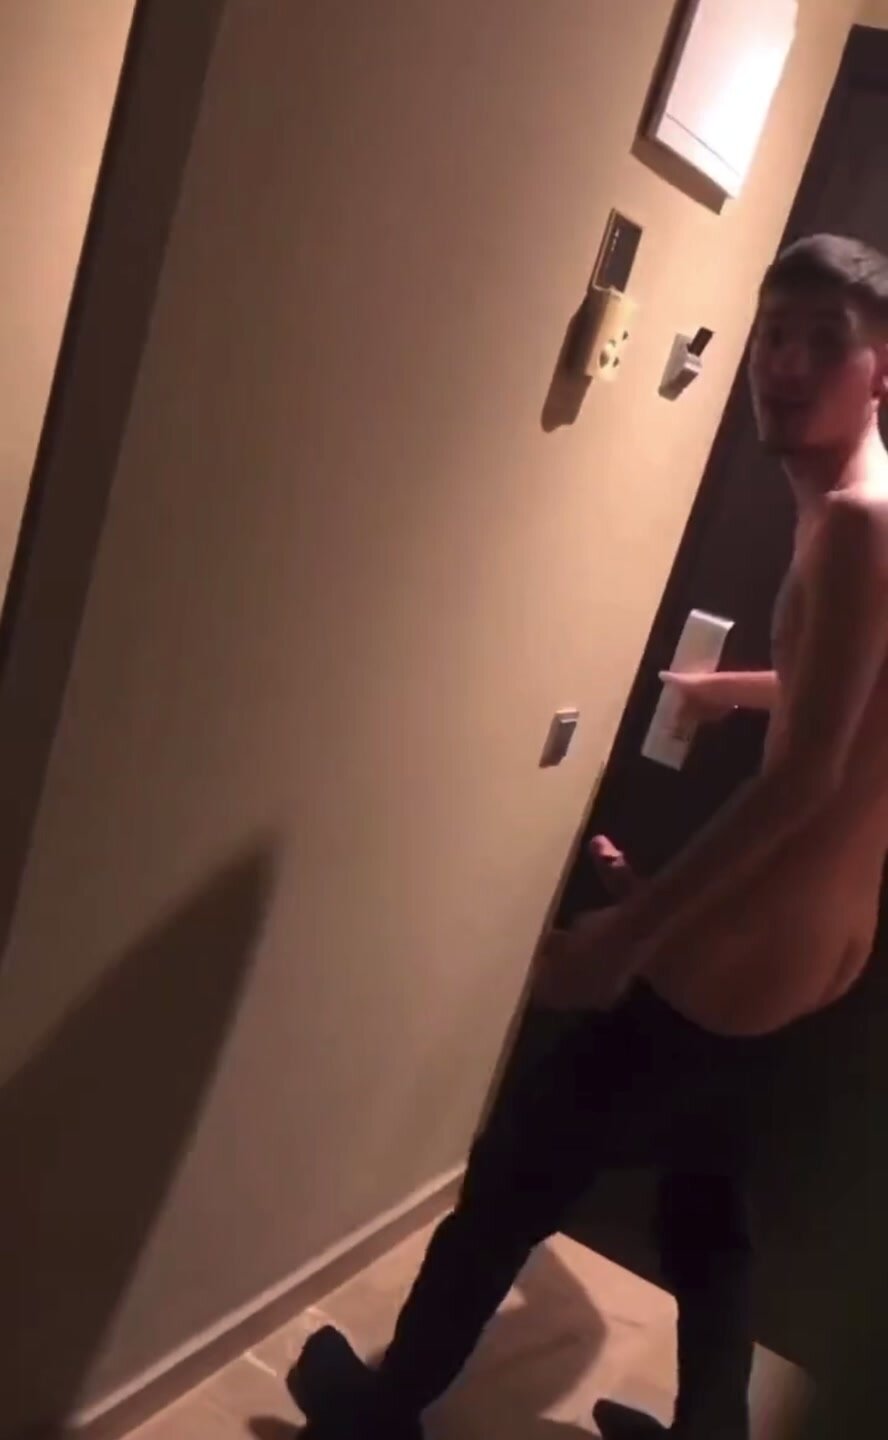 Bros open door to delivery guy naked